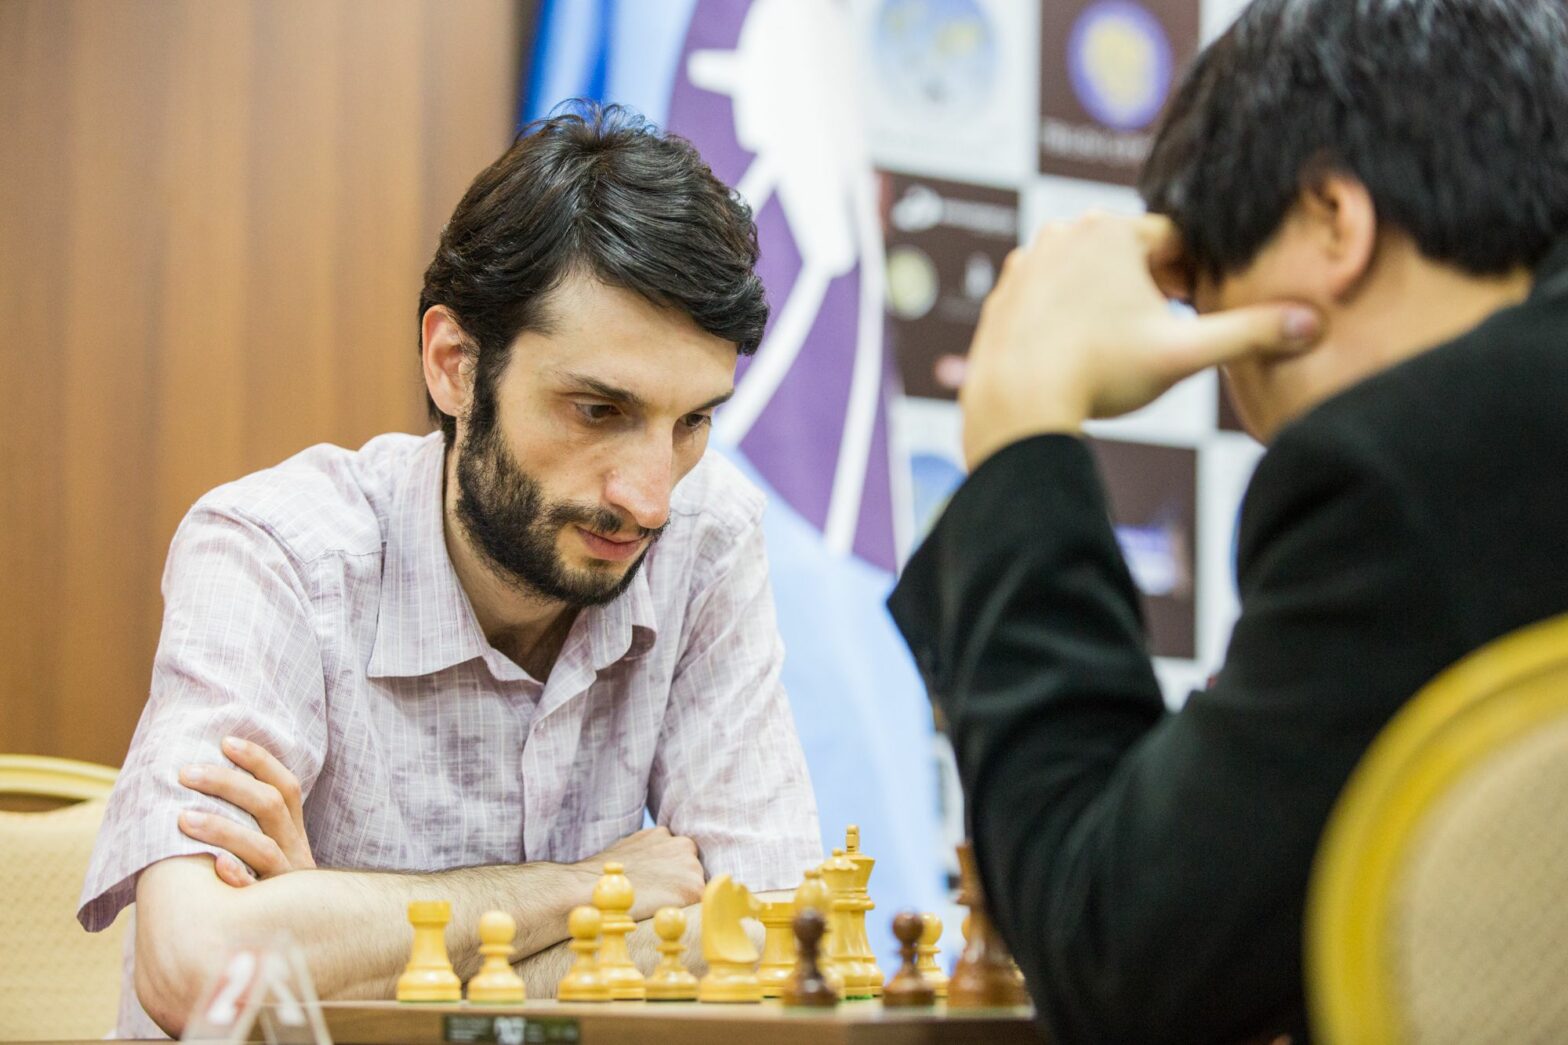 One of the world's best chess players is pursuing fashion and it's